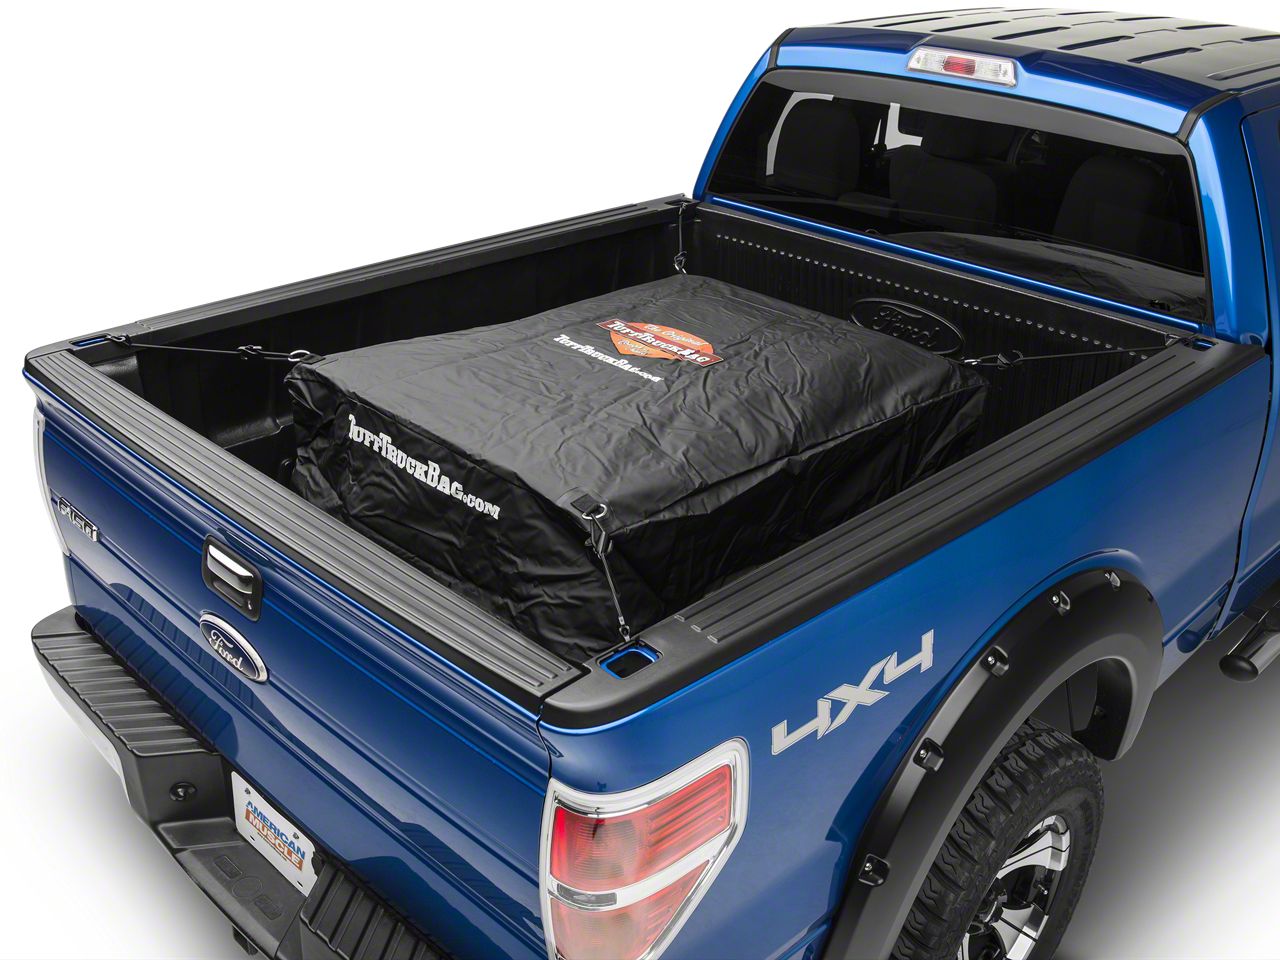 F150 Bed Liners & Bed Mats 2009-2014